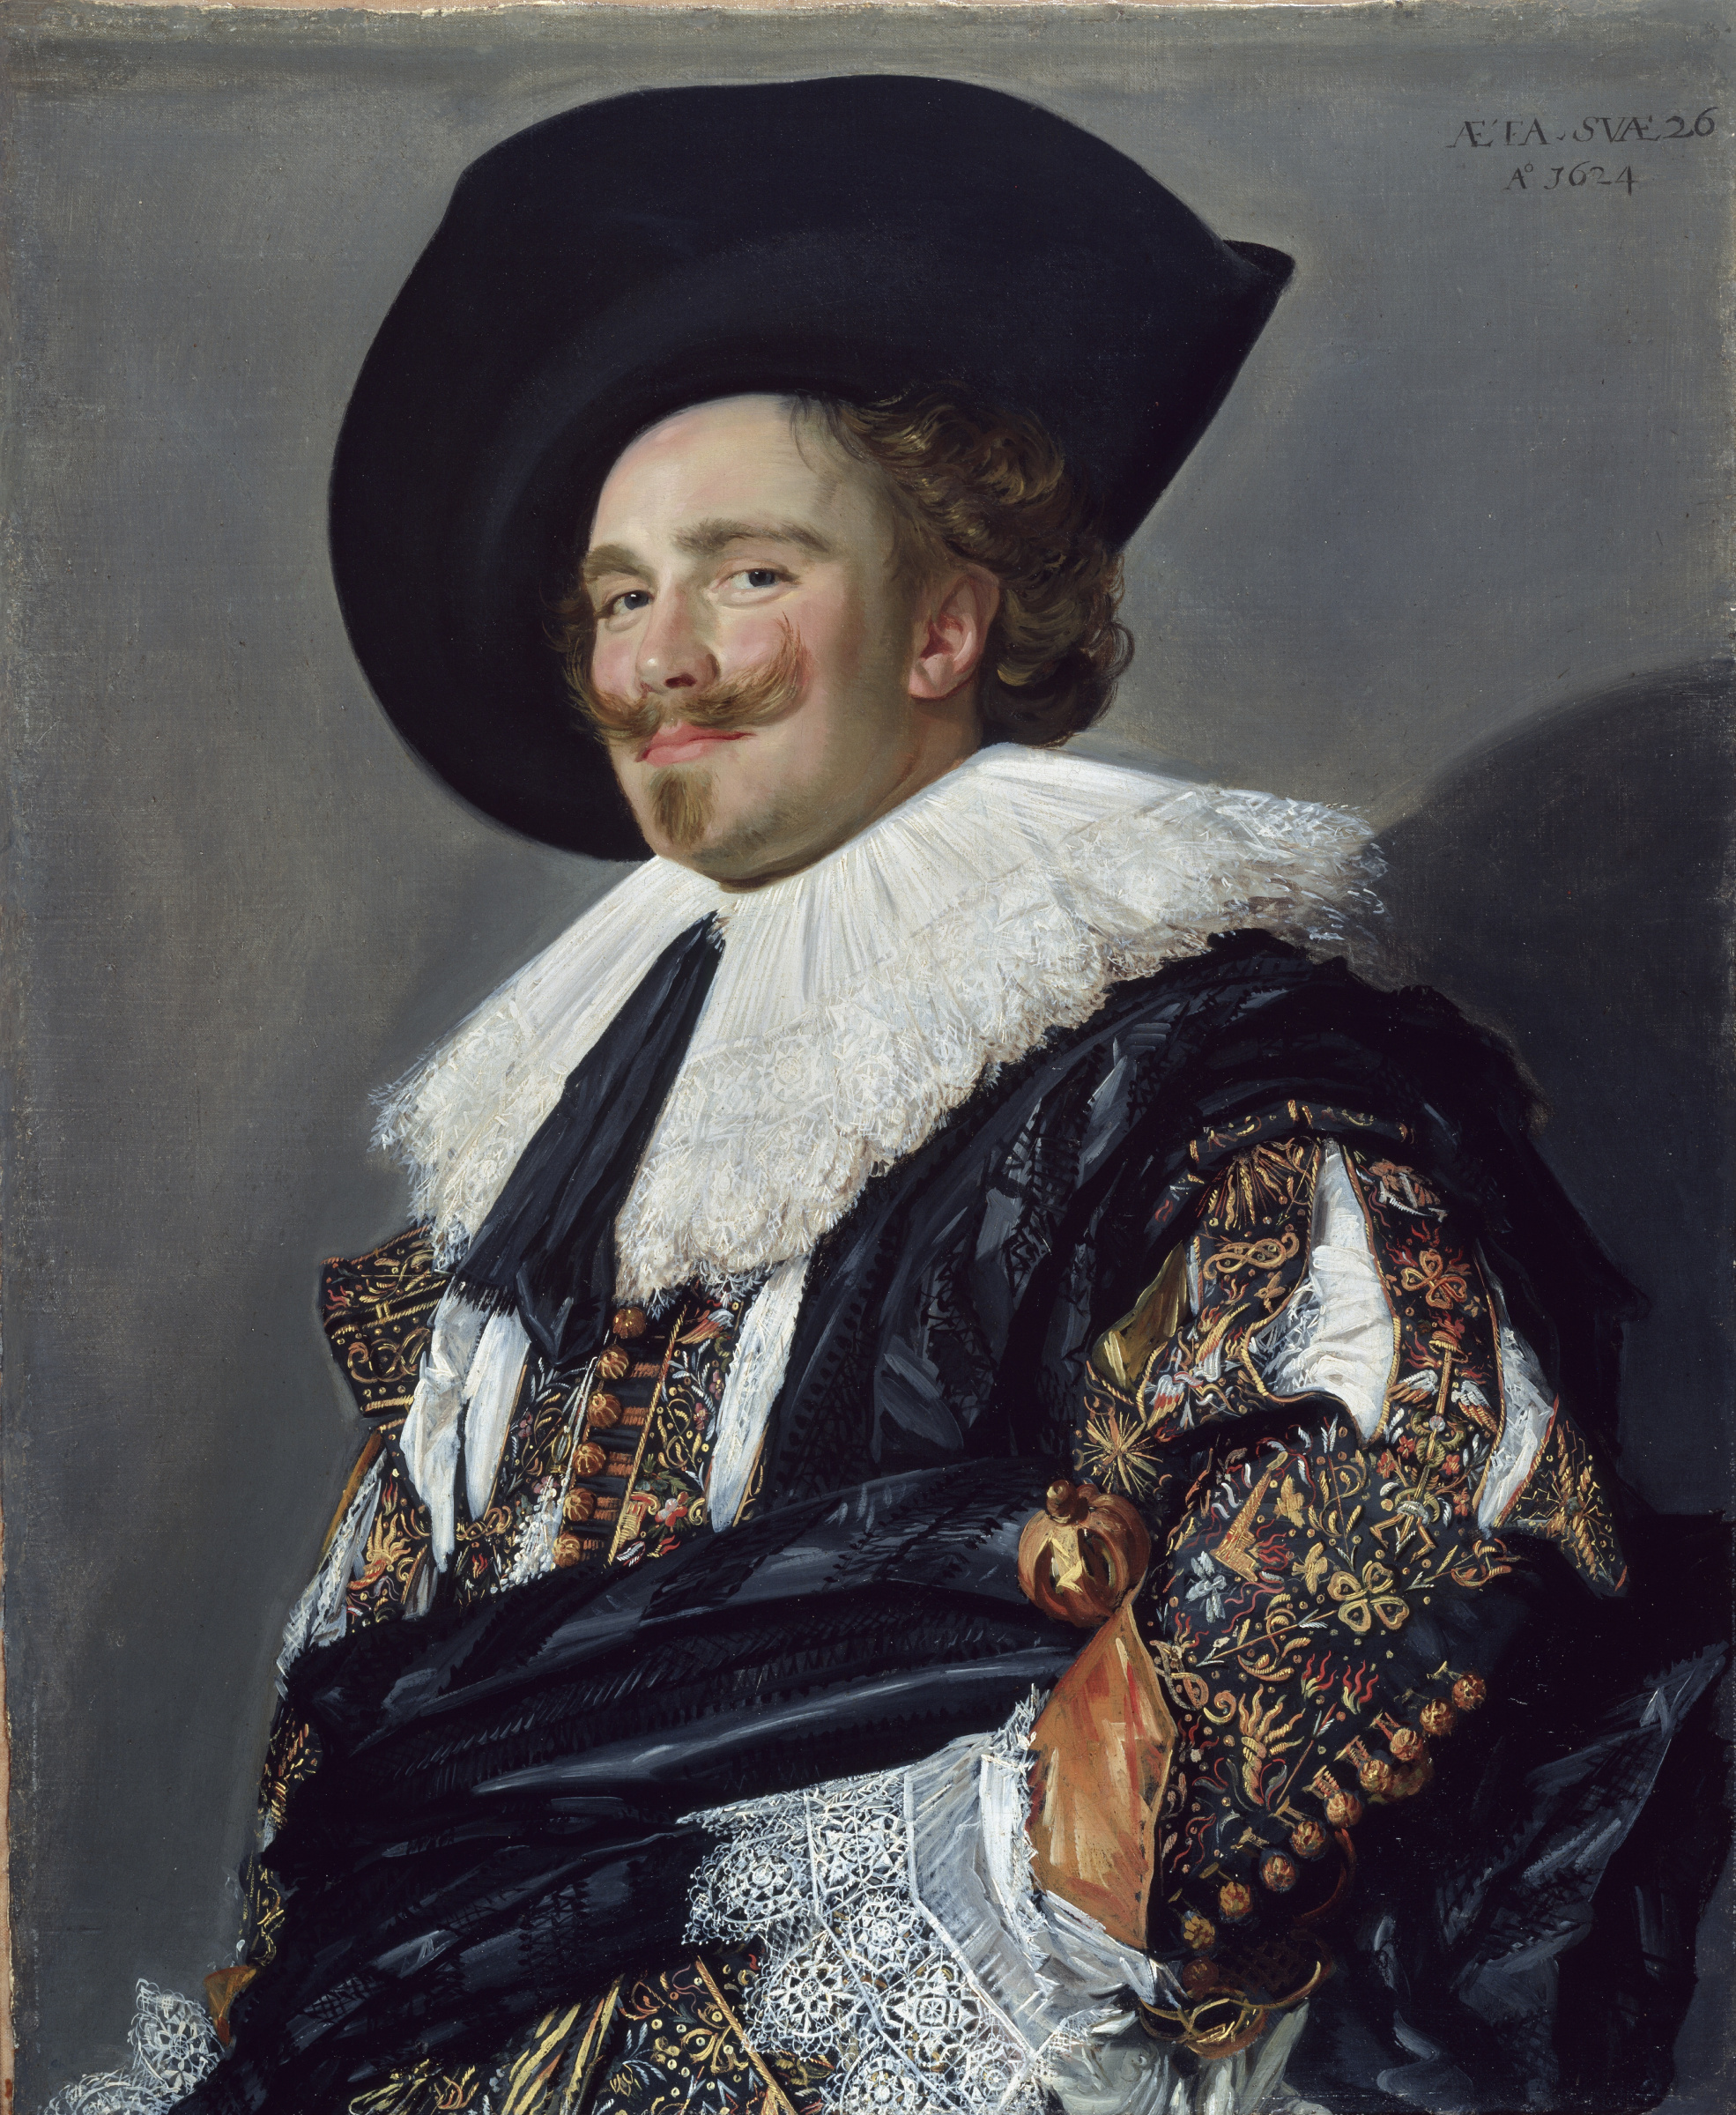 extase speling Uitputting Buy digital version: The laughing cavalier by Frans Hals | Arthive